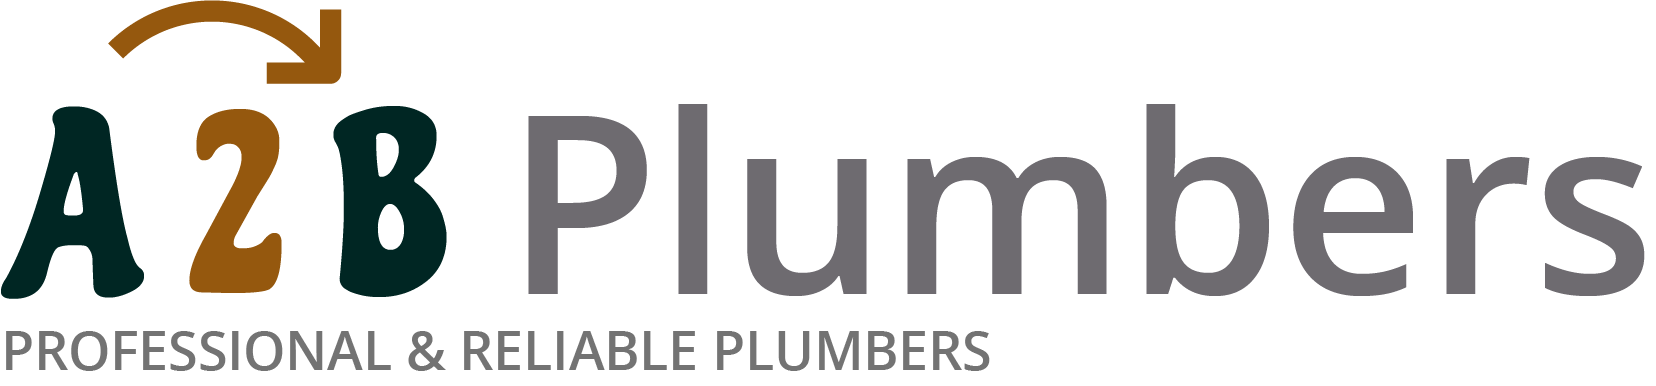 If you need a boiler installed, a radiator repaired or a leaking tap fixed, call us now - we provide services for properties in Lymington and the local area.